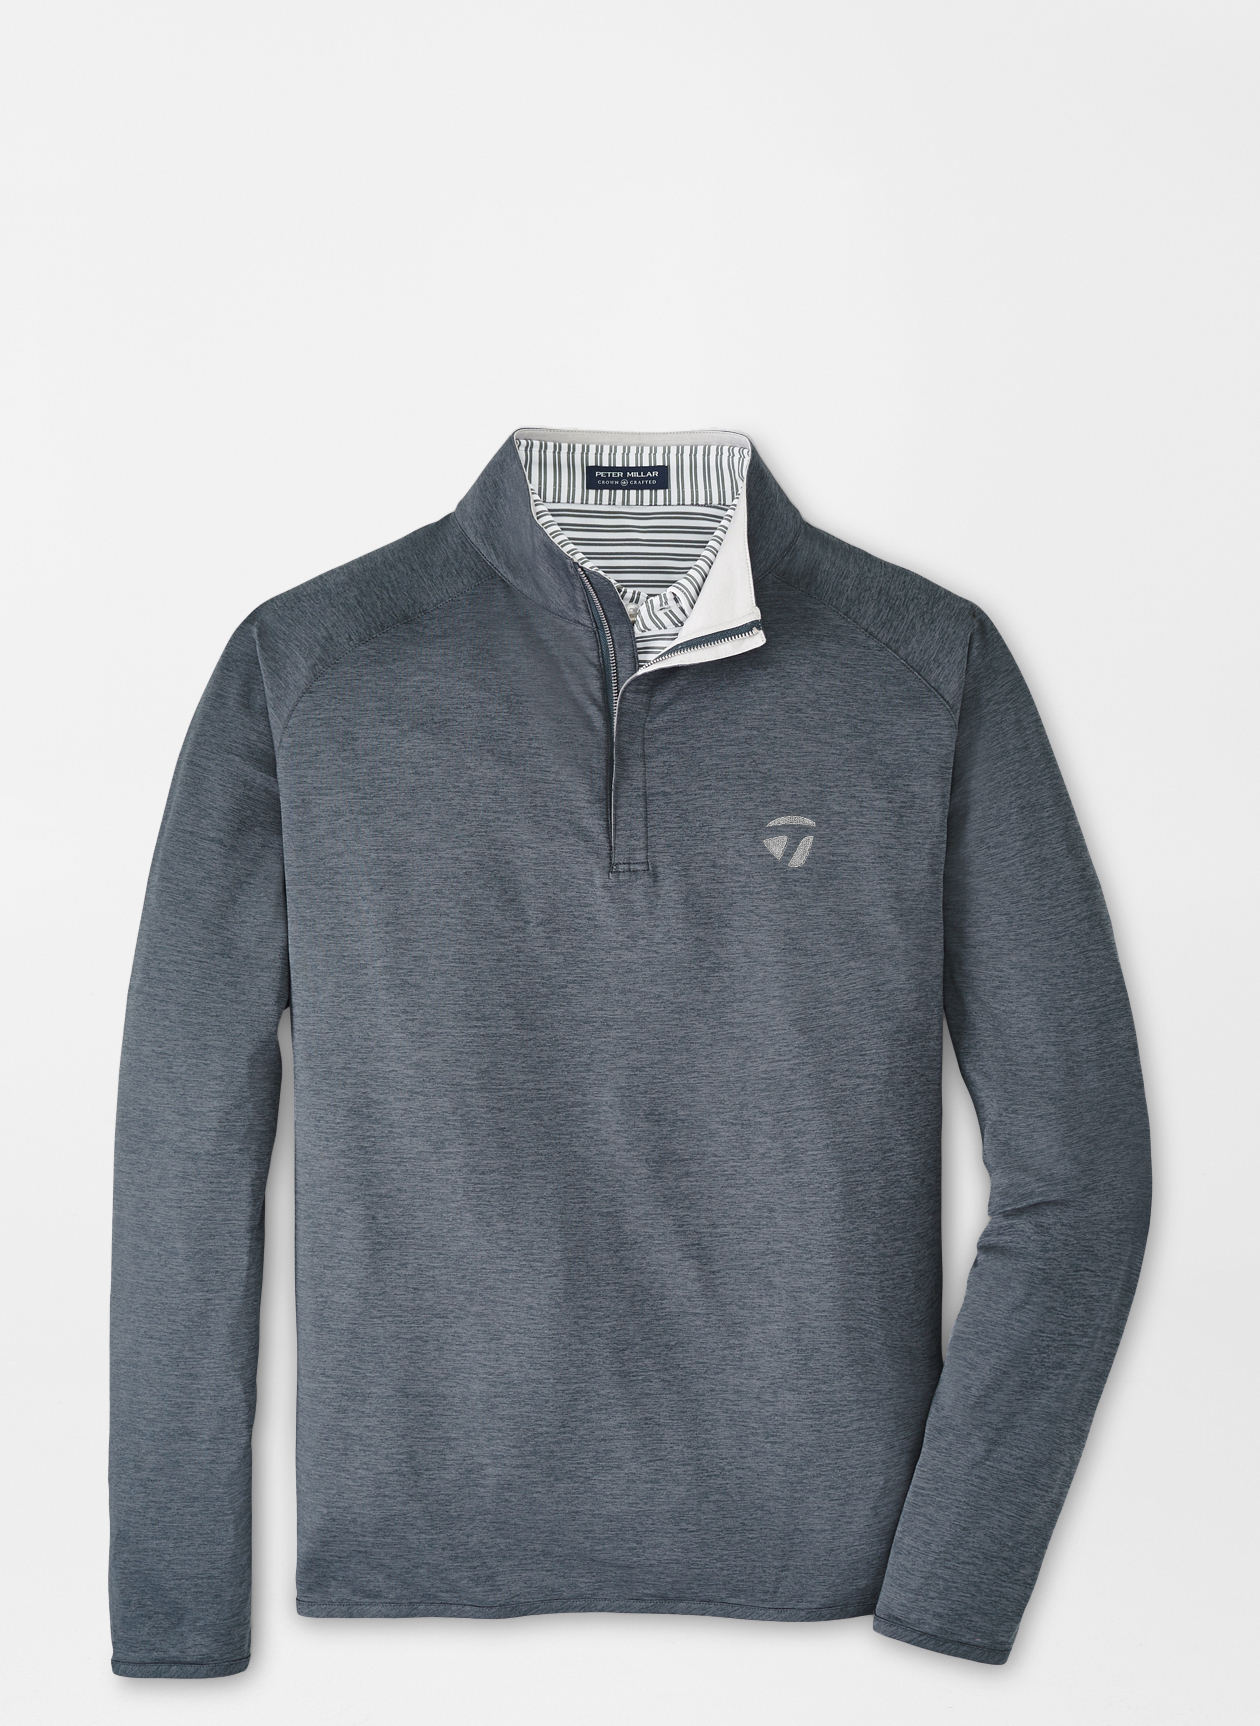 Crown Crafted Stealth Performance Quarter-Zip